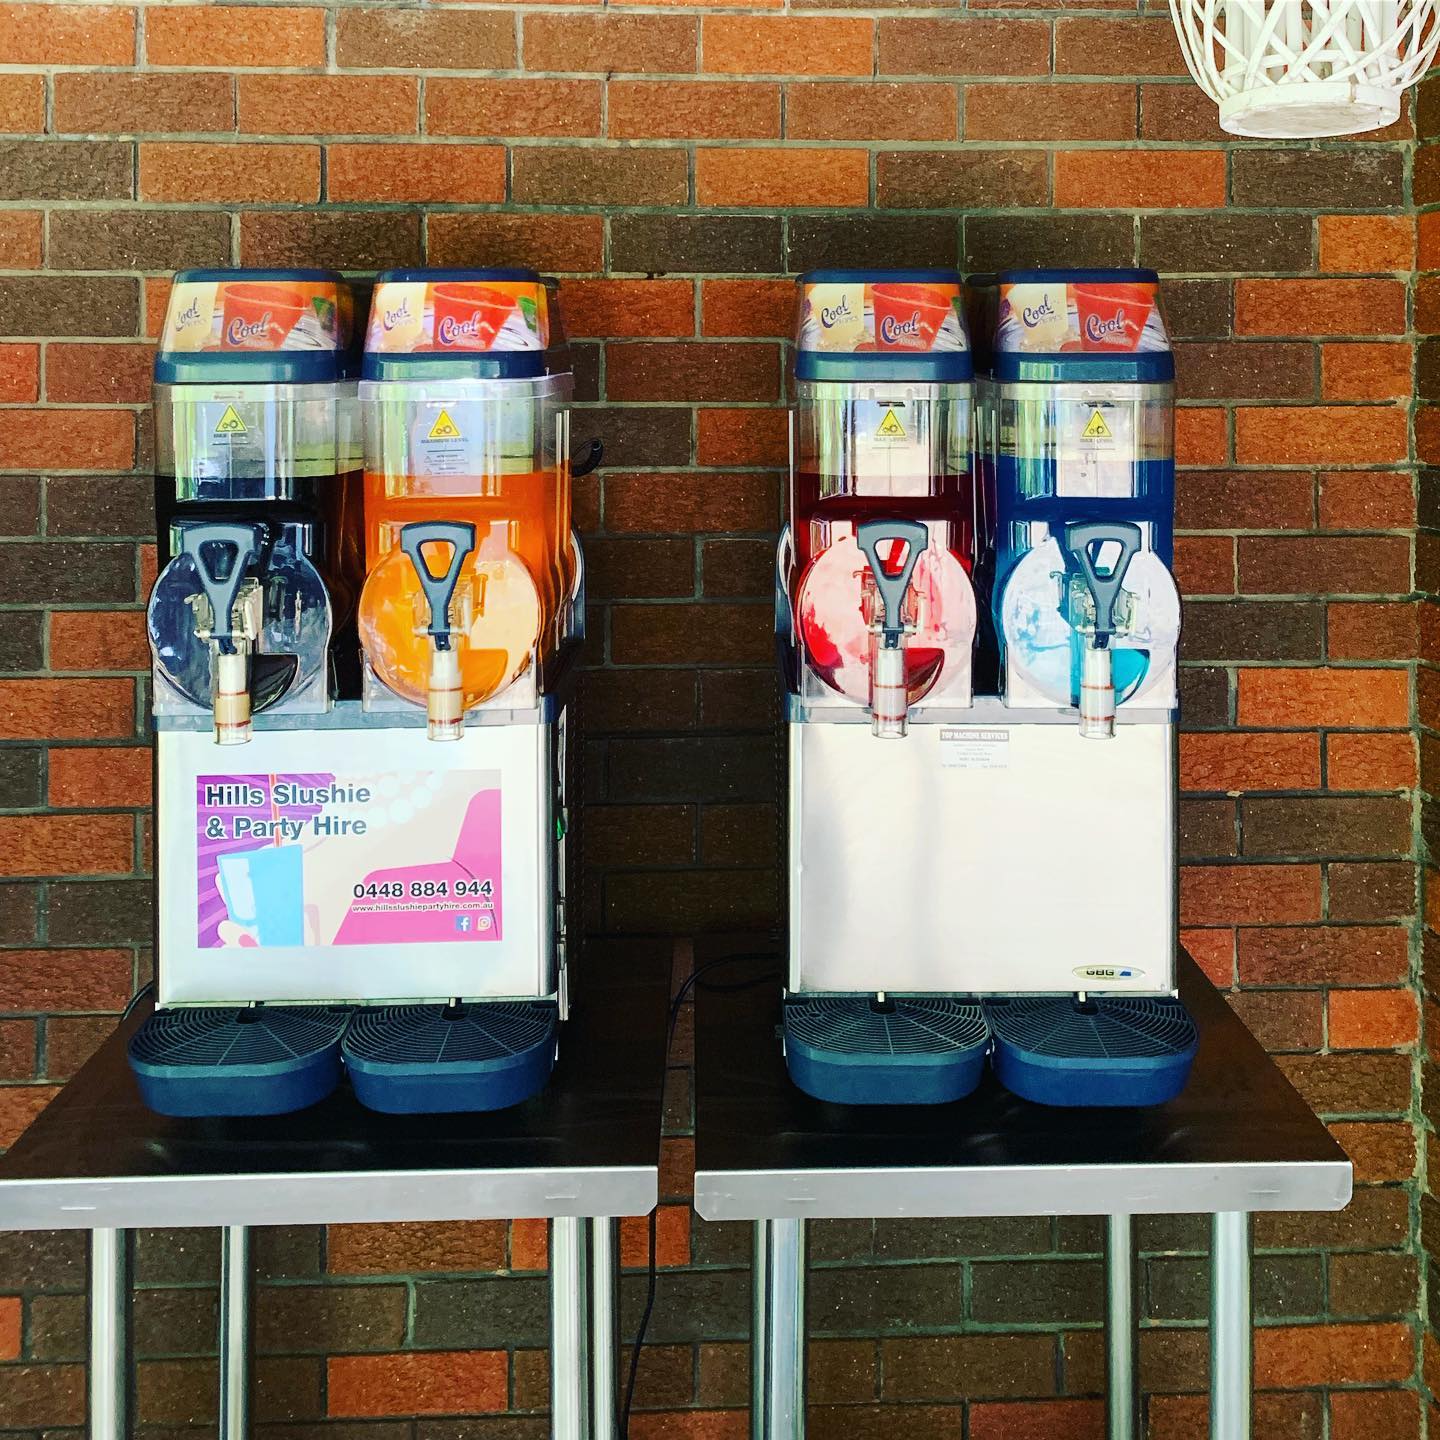 Hills Slushie And Party Hire